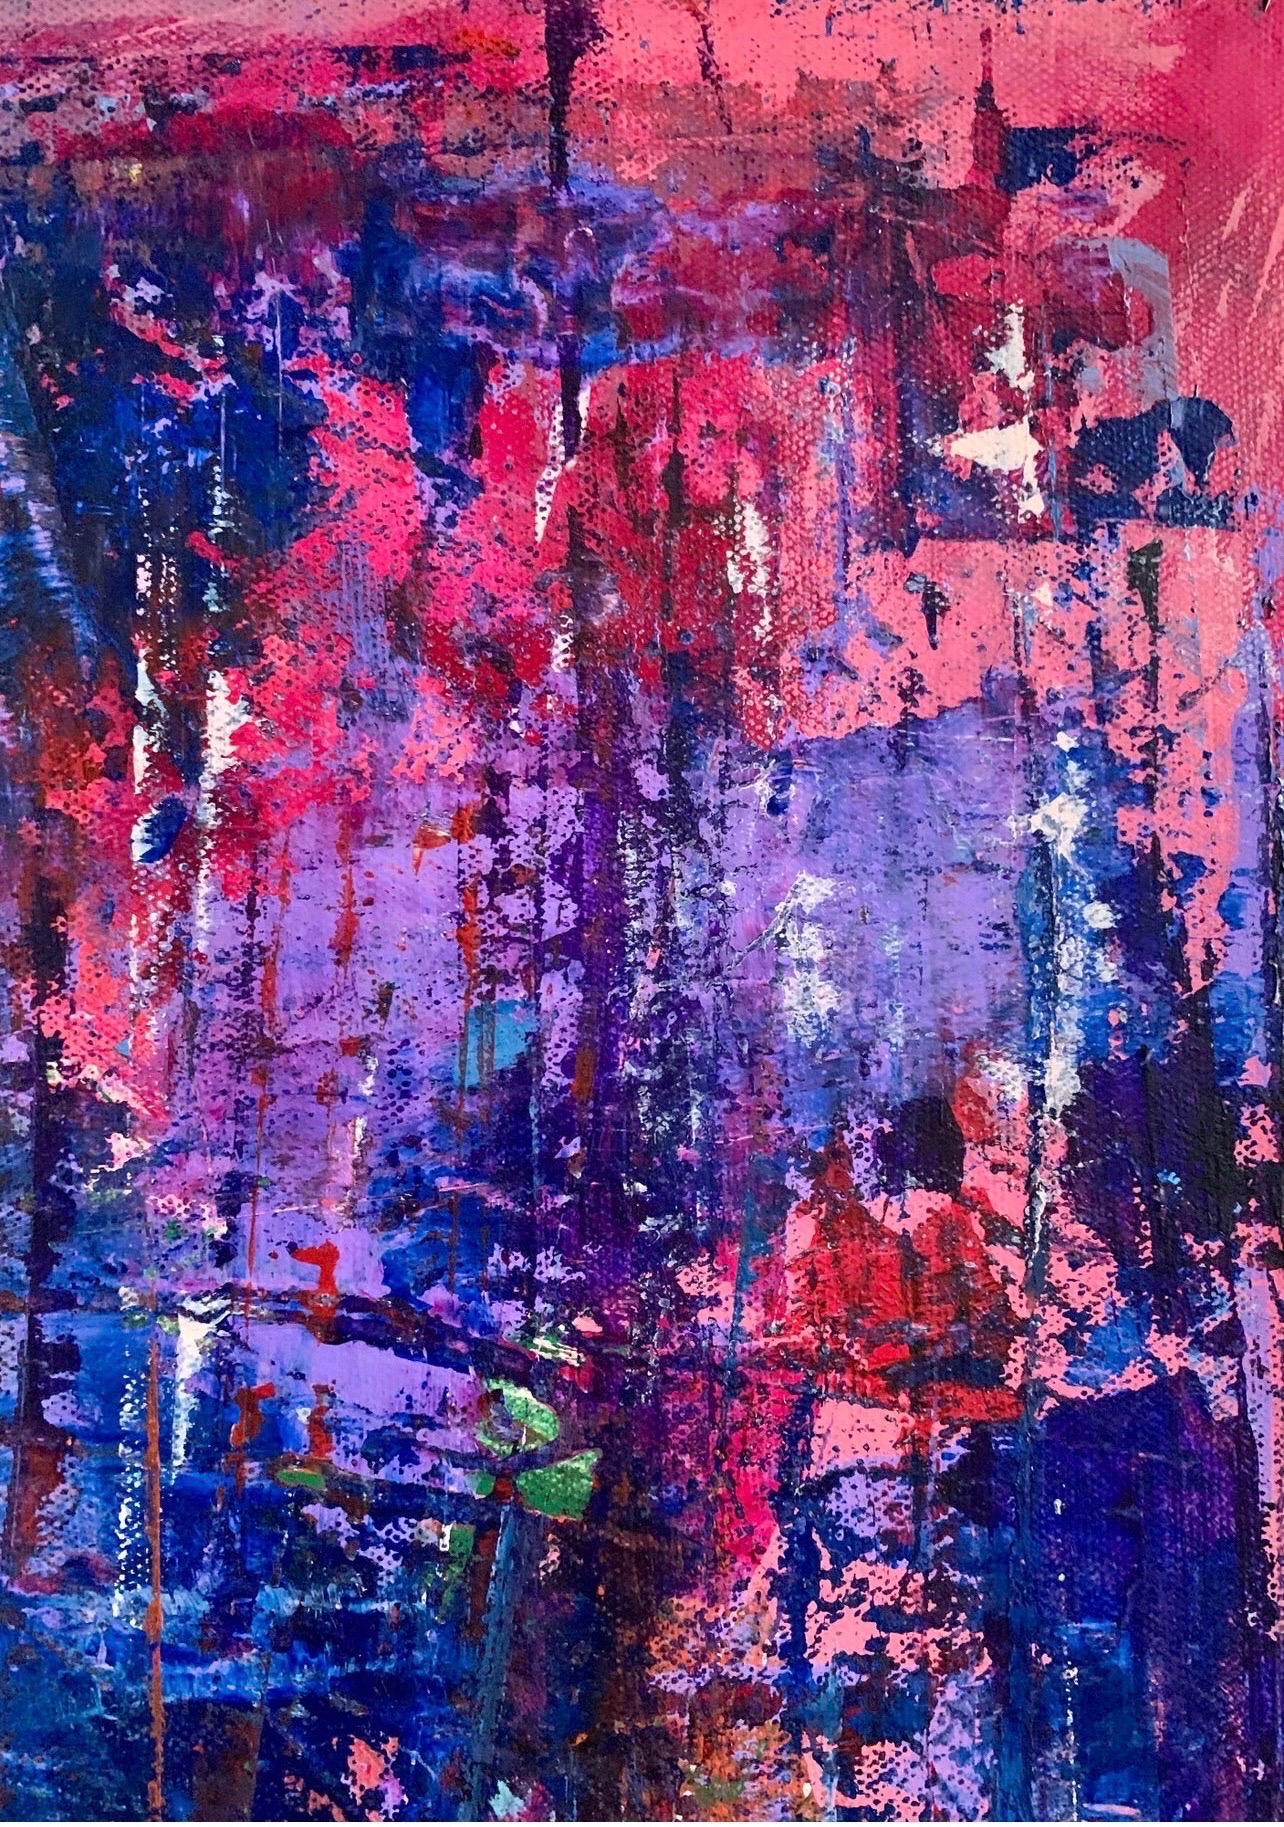 An original abstract expressionist painitng by contemporary artist Arlene Carr done in multiple colors layered to creat depth and movement utilizing non brush techniques. Signed in lower right. One of five Carr works of art being sold this week on